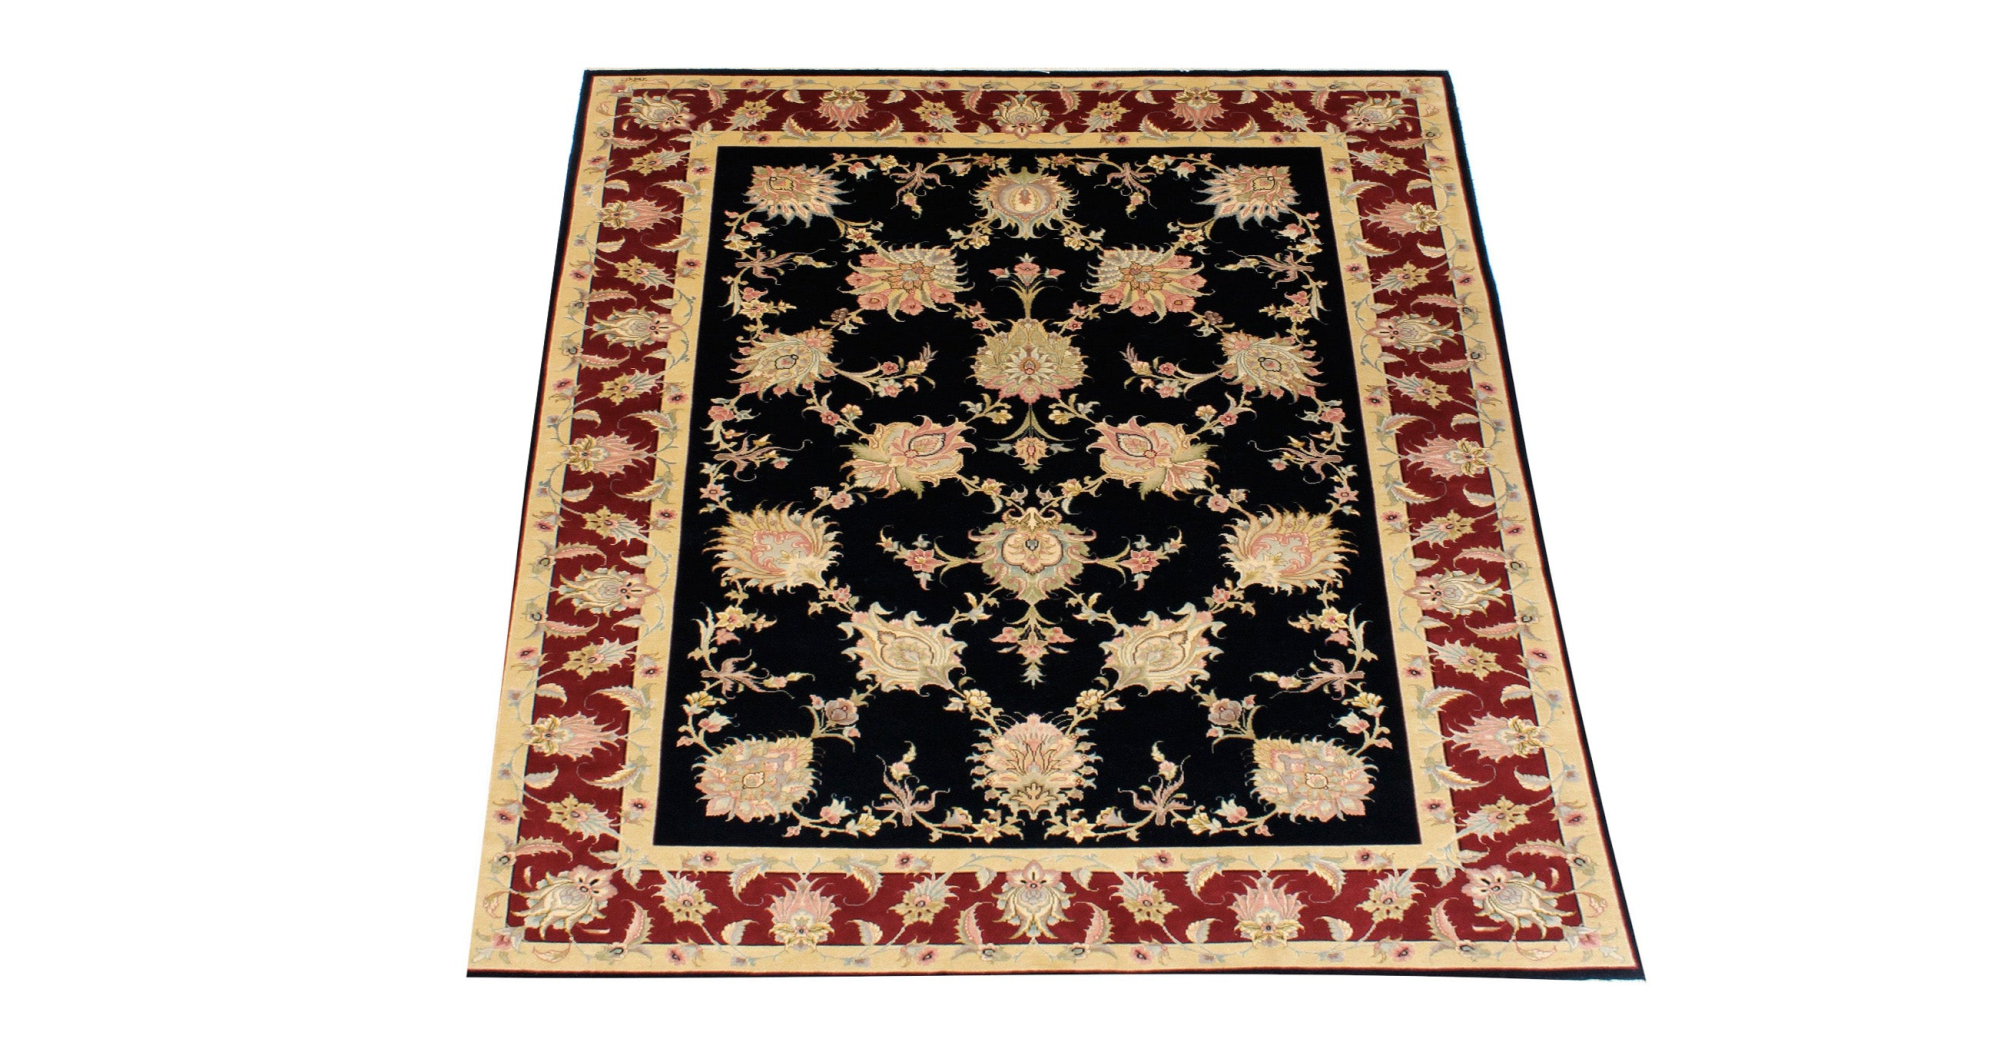 Area rug for living space and any room. Floor decor, rugs and carpets from Tabrizi Rugs. Tabriz Gol - 5'9